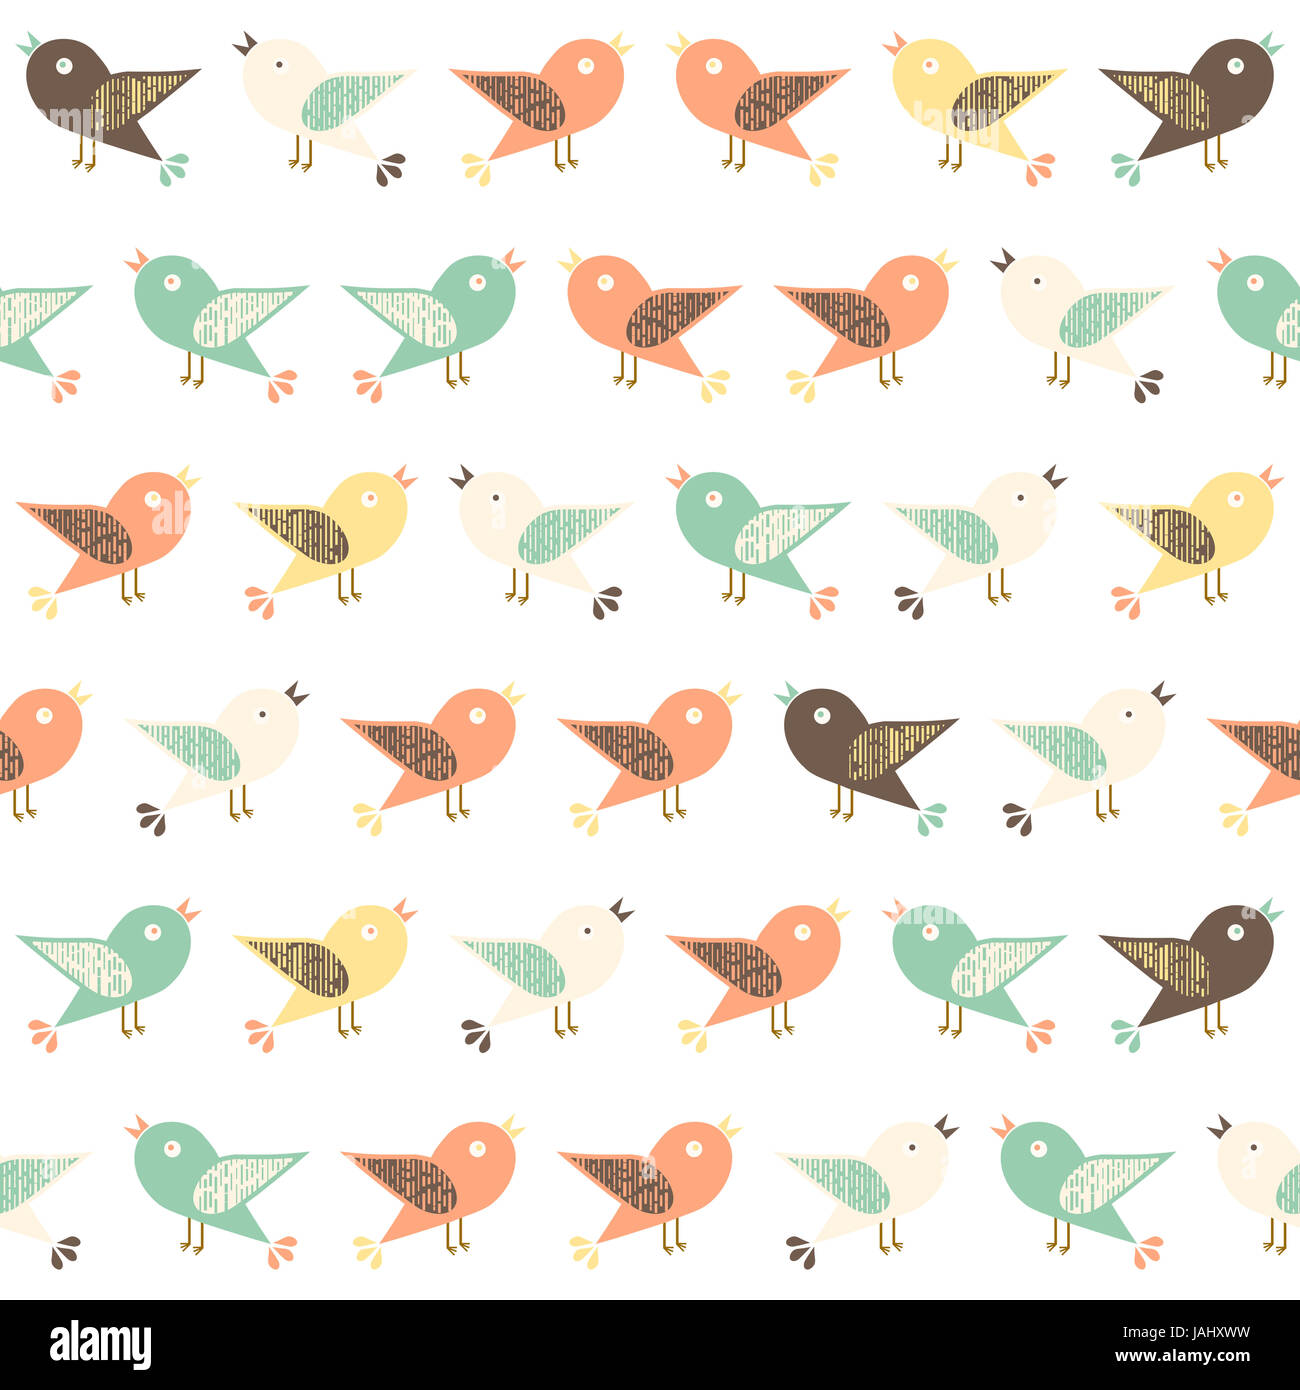 Nature pattern with assorted birds. Digital art. Stock Photo